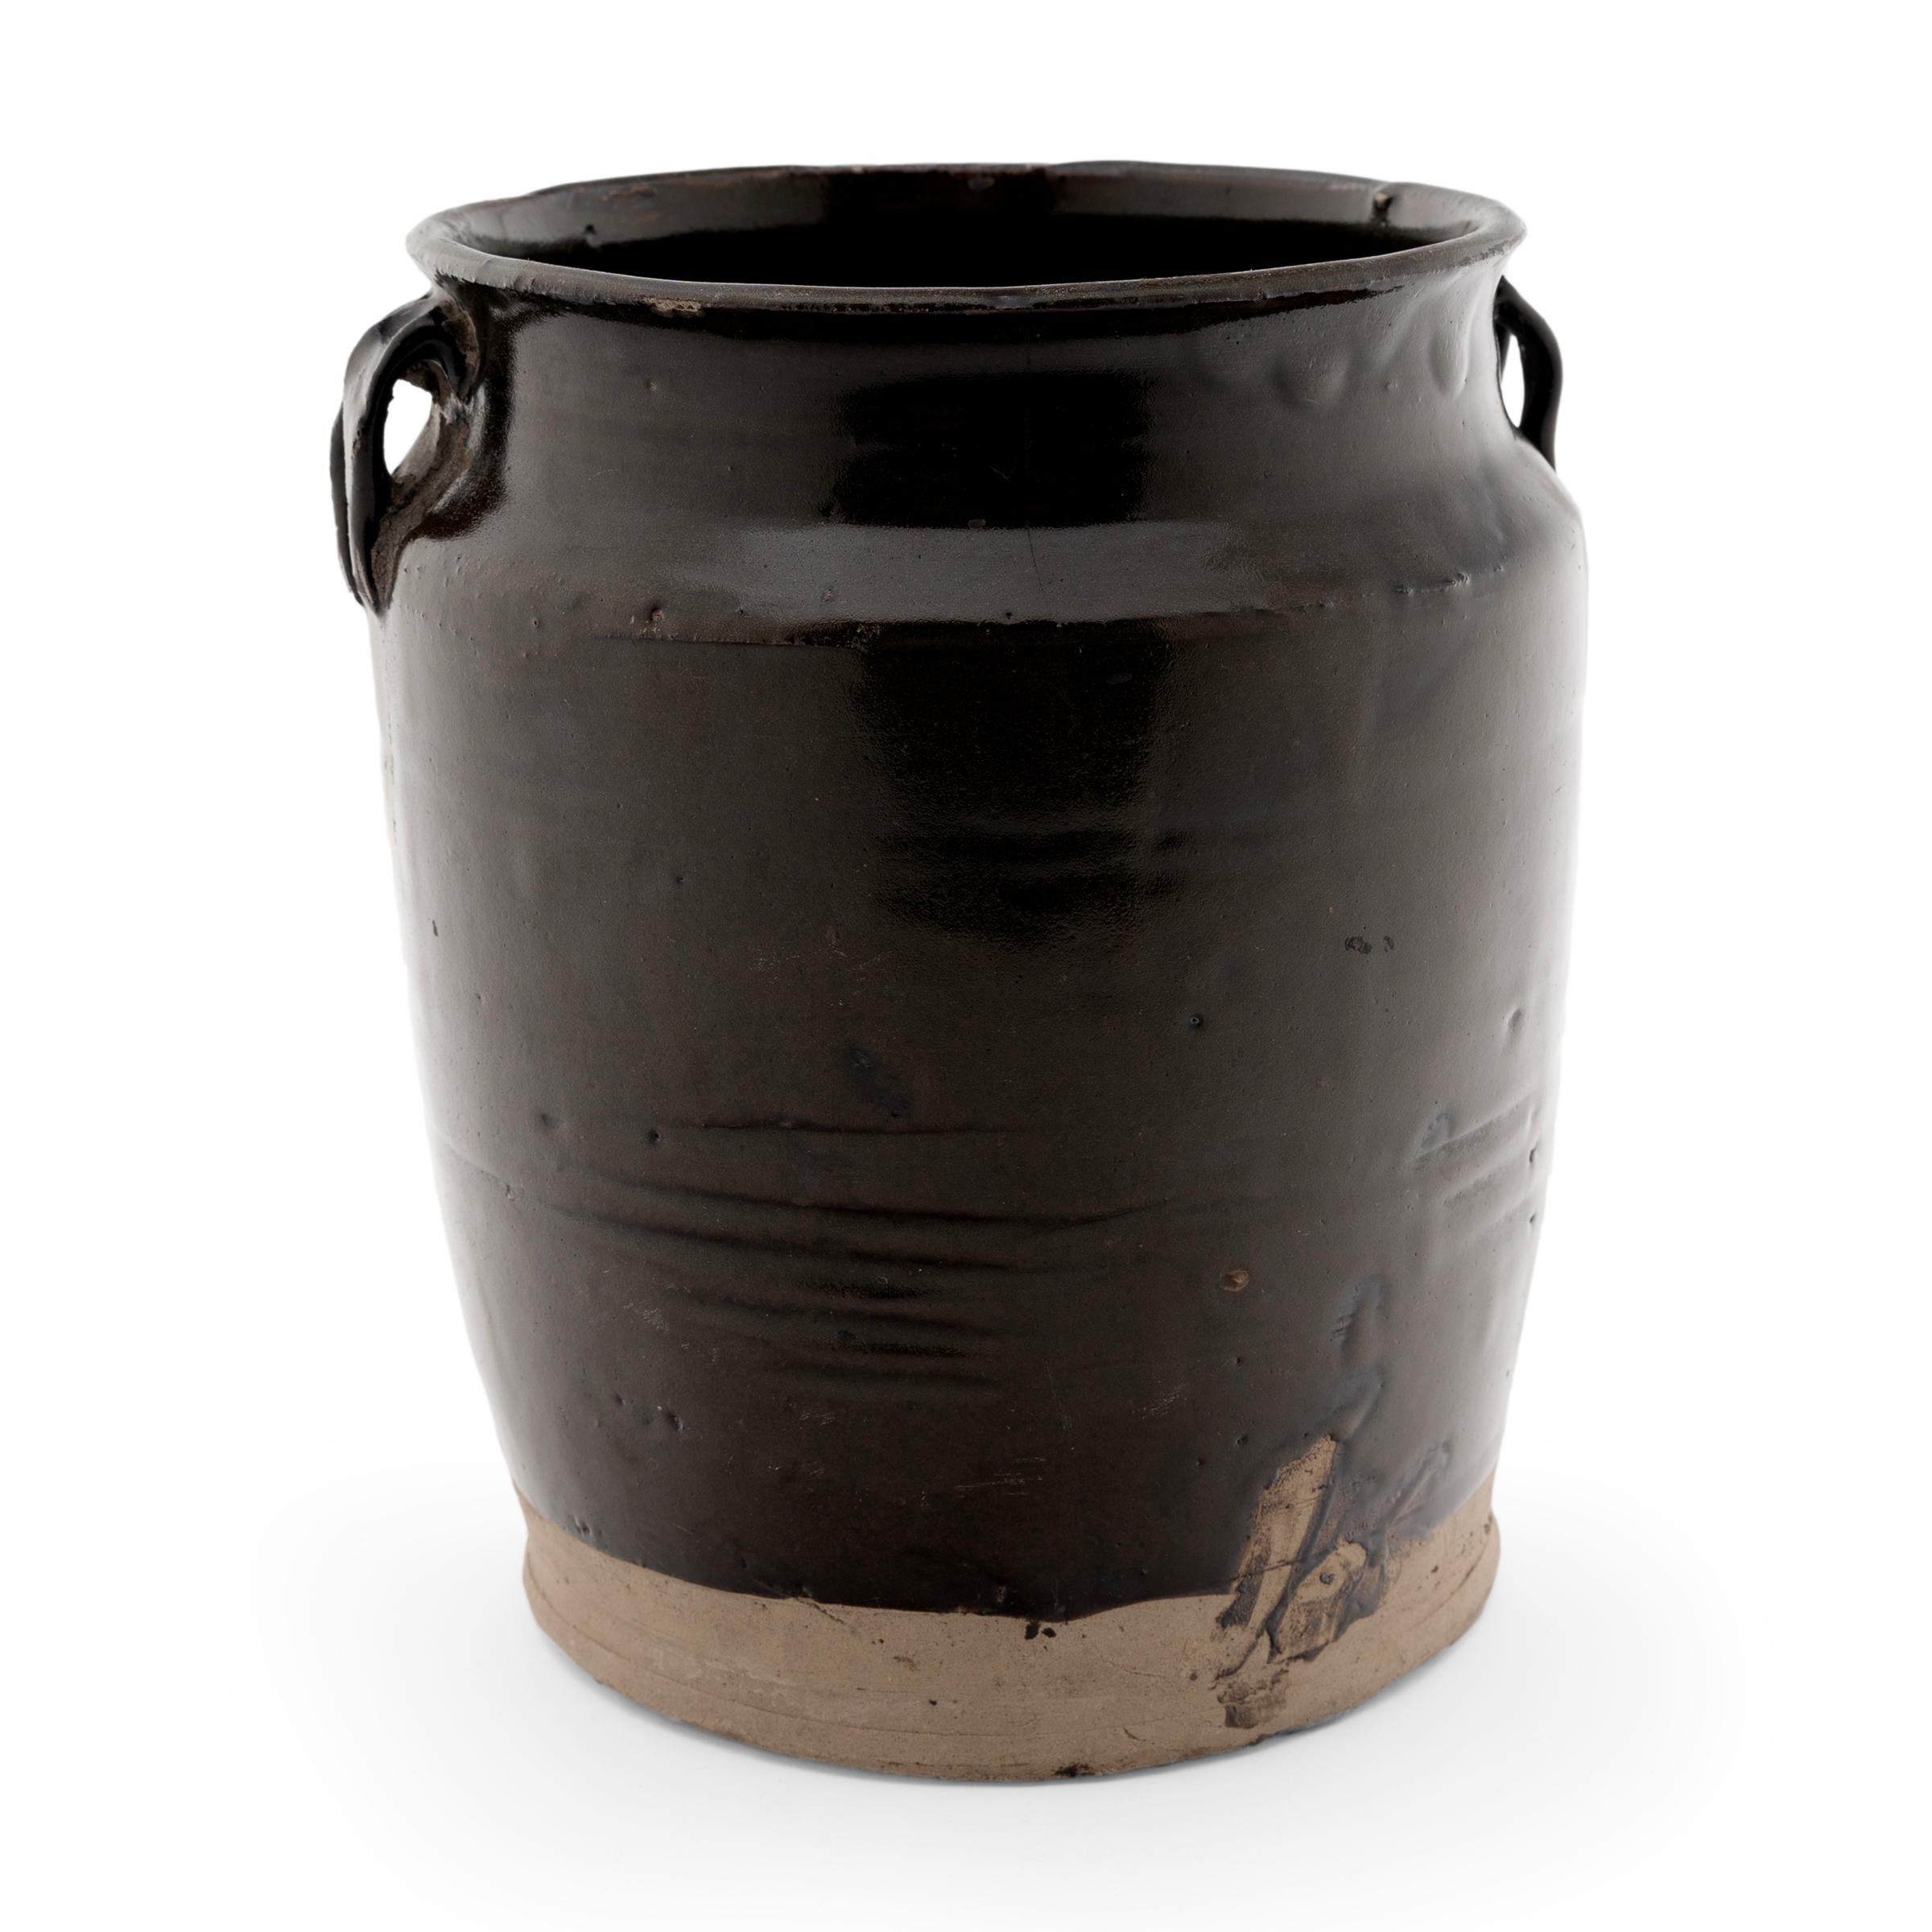 A dark brown glaze clings to the tapered form of this 19th-century jar, once used daily in a Qing-dynasty kitchen as evidenced by the glazed interior. The wide-mouth jar is shaped with gently sloping sides, rounded shoulders topped with small strap